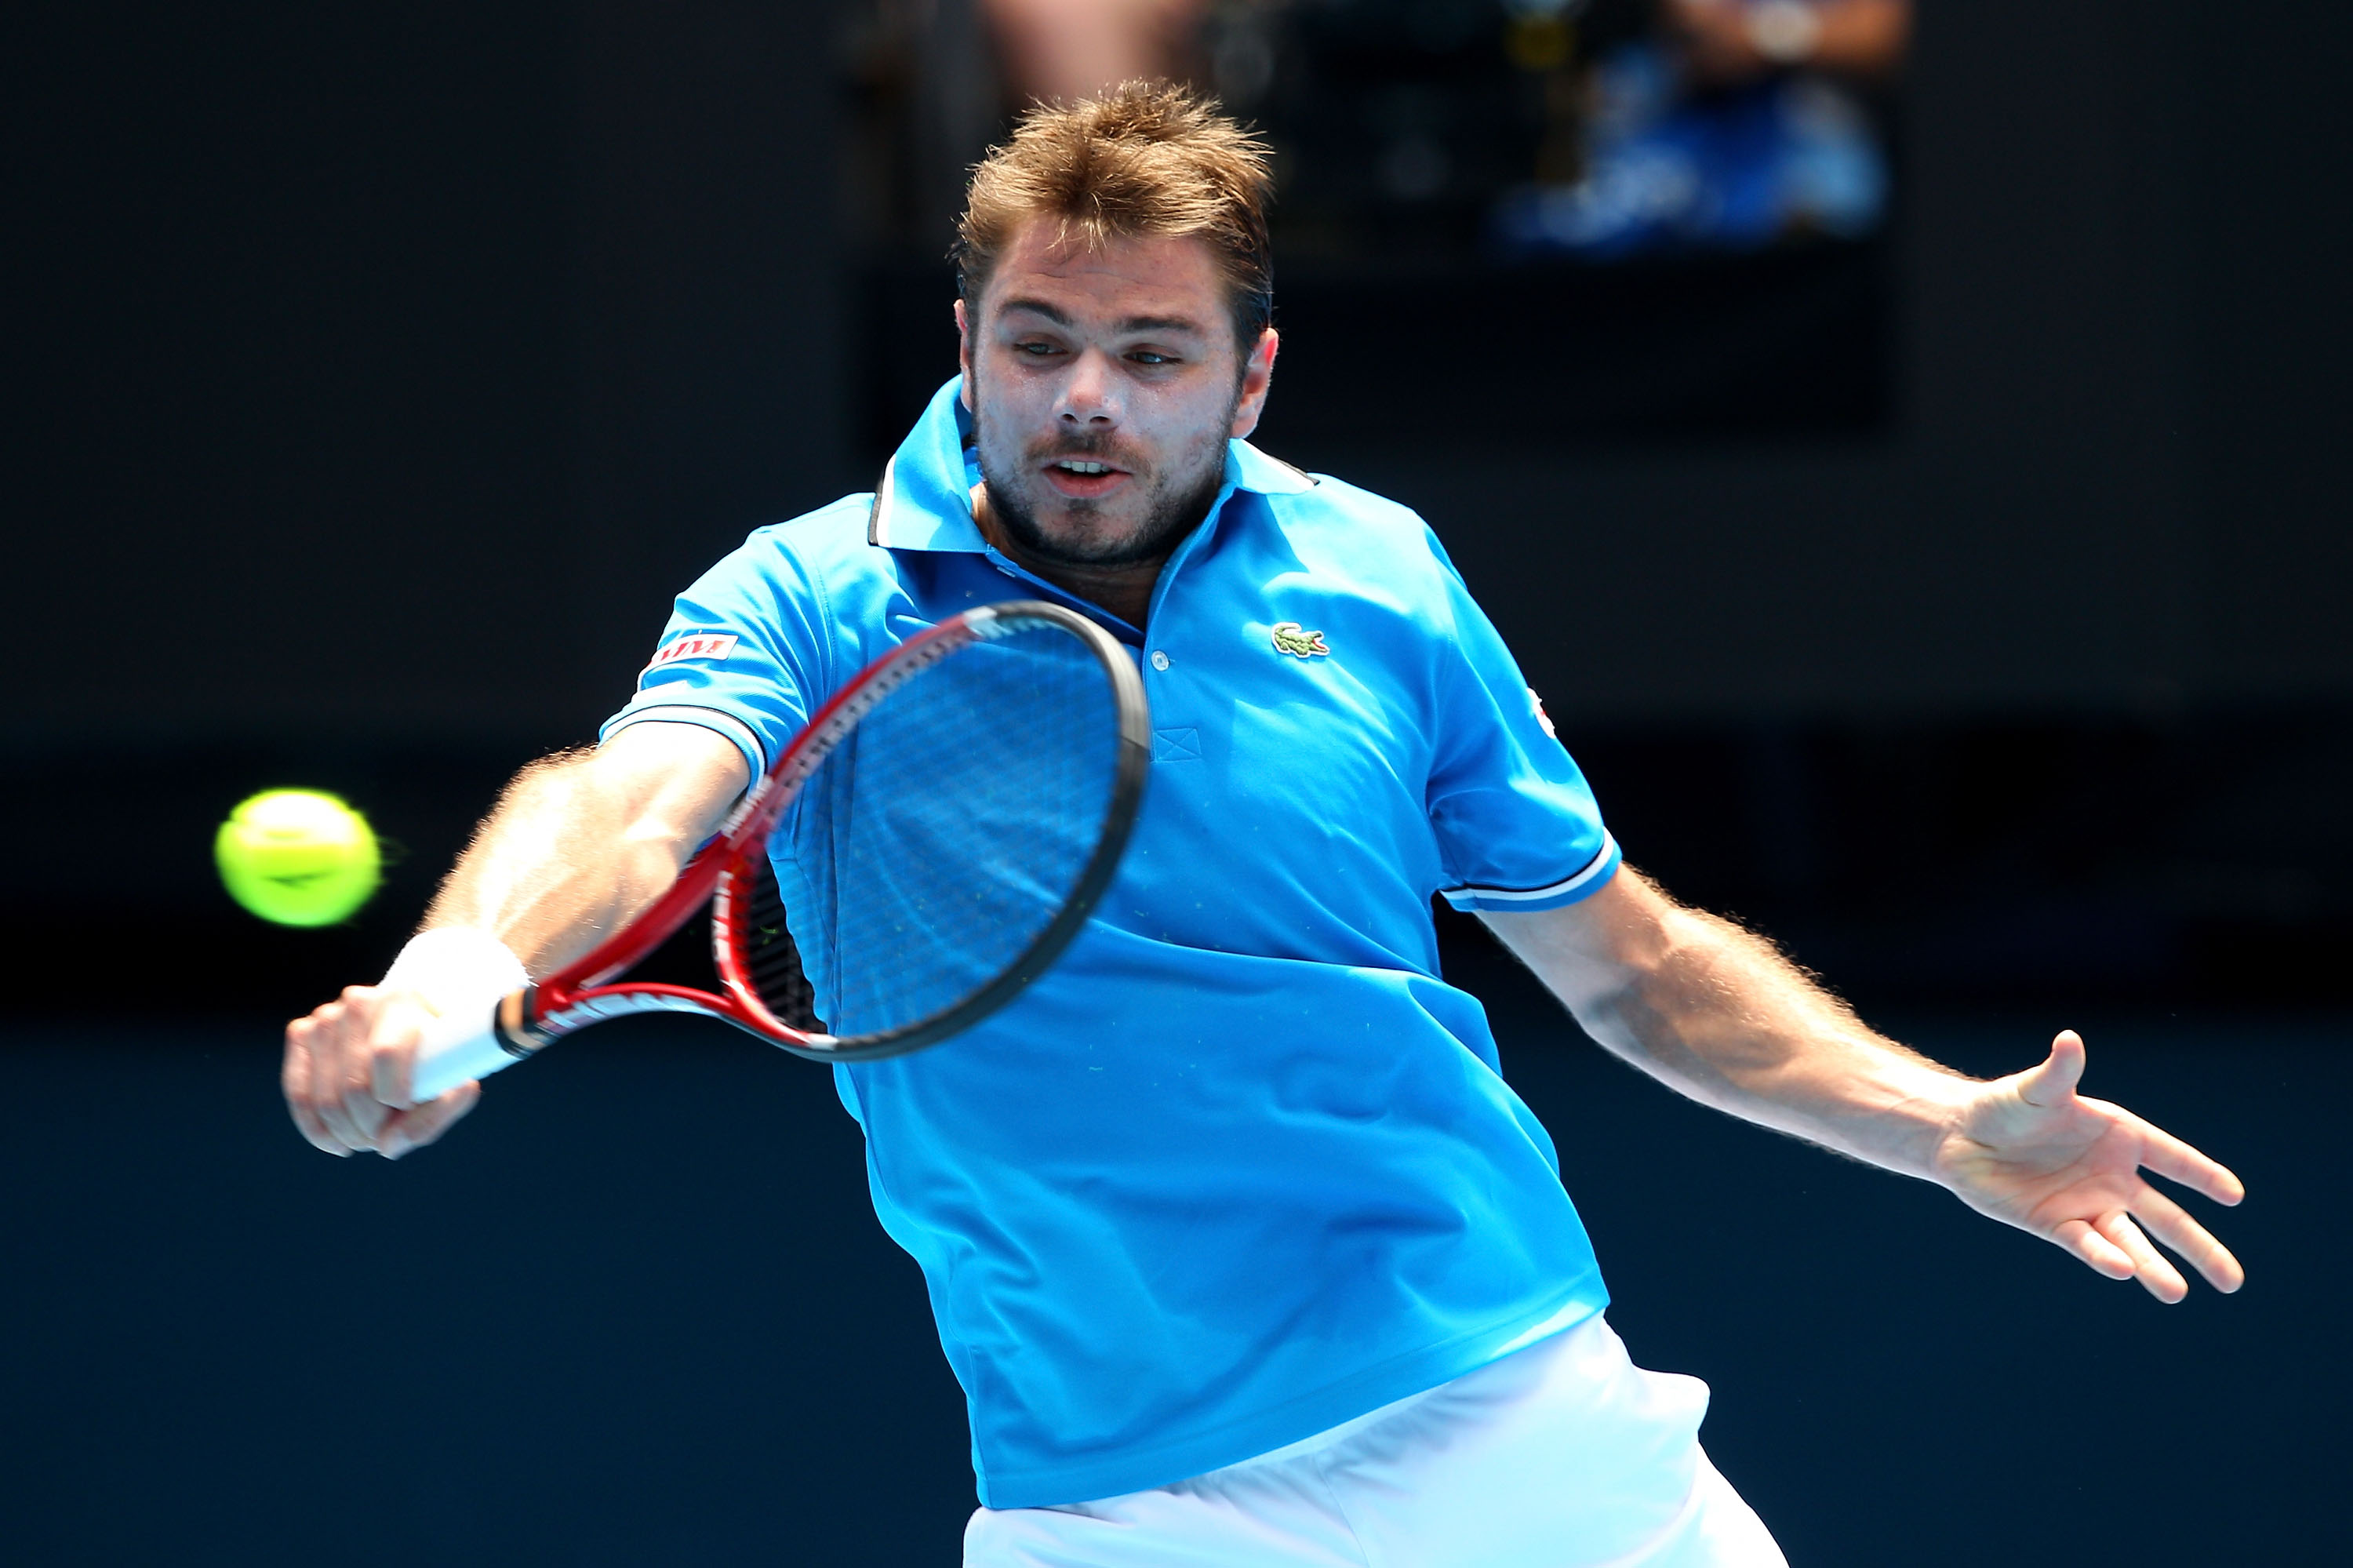 MELBOURNE, AUSTRALIA - JANUARY 25:  Stanislas Wawrinka of Switzerland plays a backhand in his quarterfinal match against Roger Federer of Switzerland during day nine of the 2011 Australian Open at Melbourne Park on January 25, 2011 in Melbourne, Australia